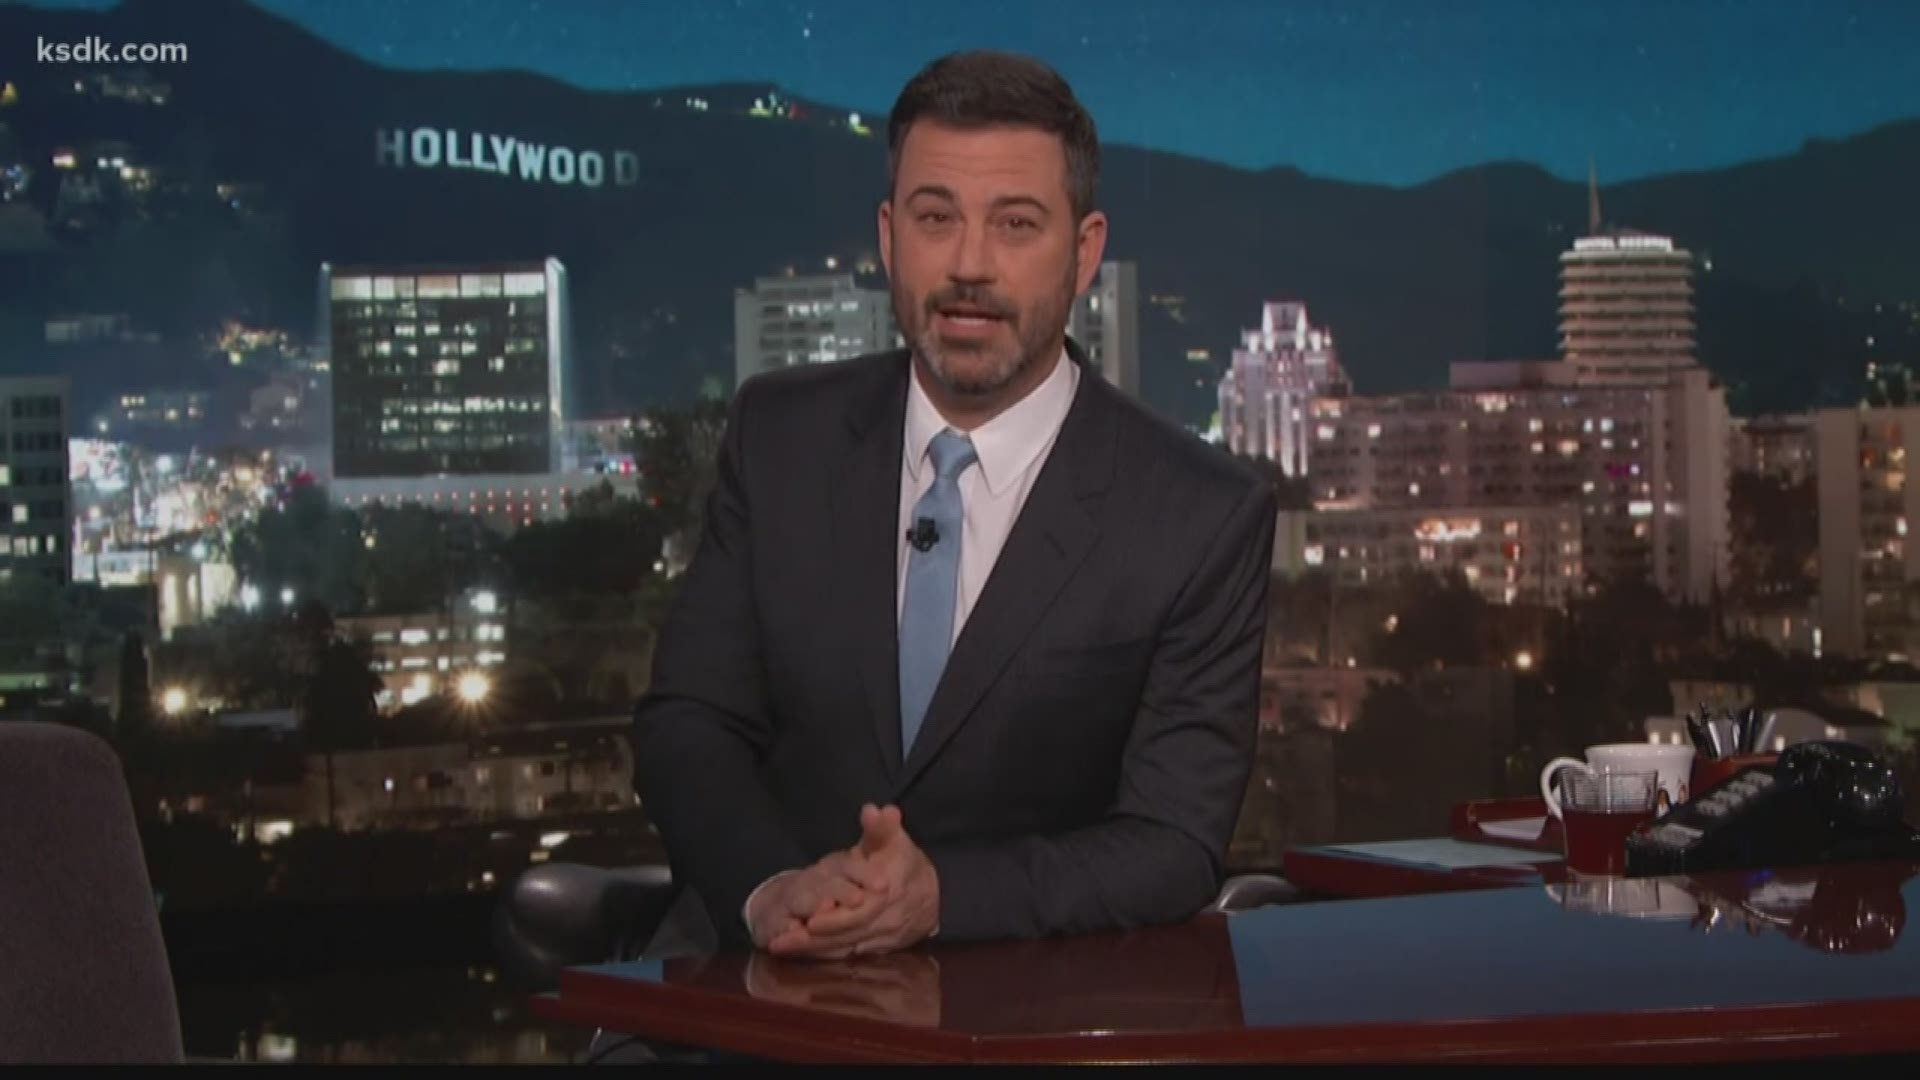 Jimmy Kimmel is helping to raise awareness and money for the Mighty Oakes Heart Foundation which helps families of children with heart defects.